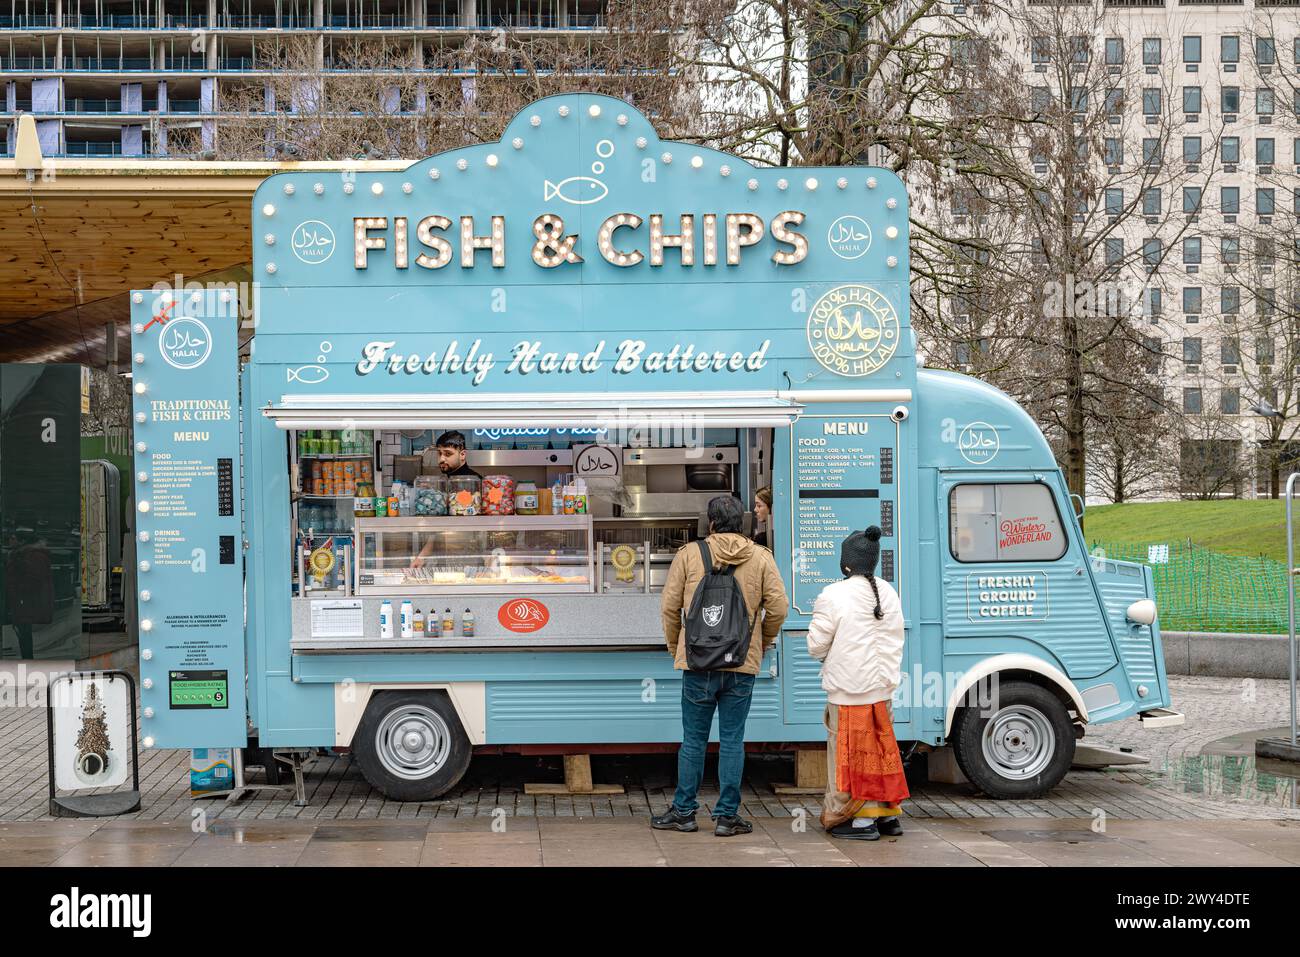 Customers waiting for their food at a mobile fish and chips van selling 100% halal meals in London. Travel, culture, small business or diet concept. Stock Photo